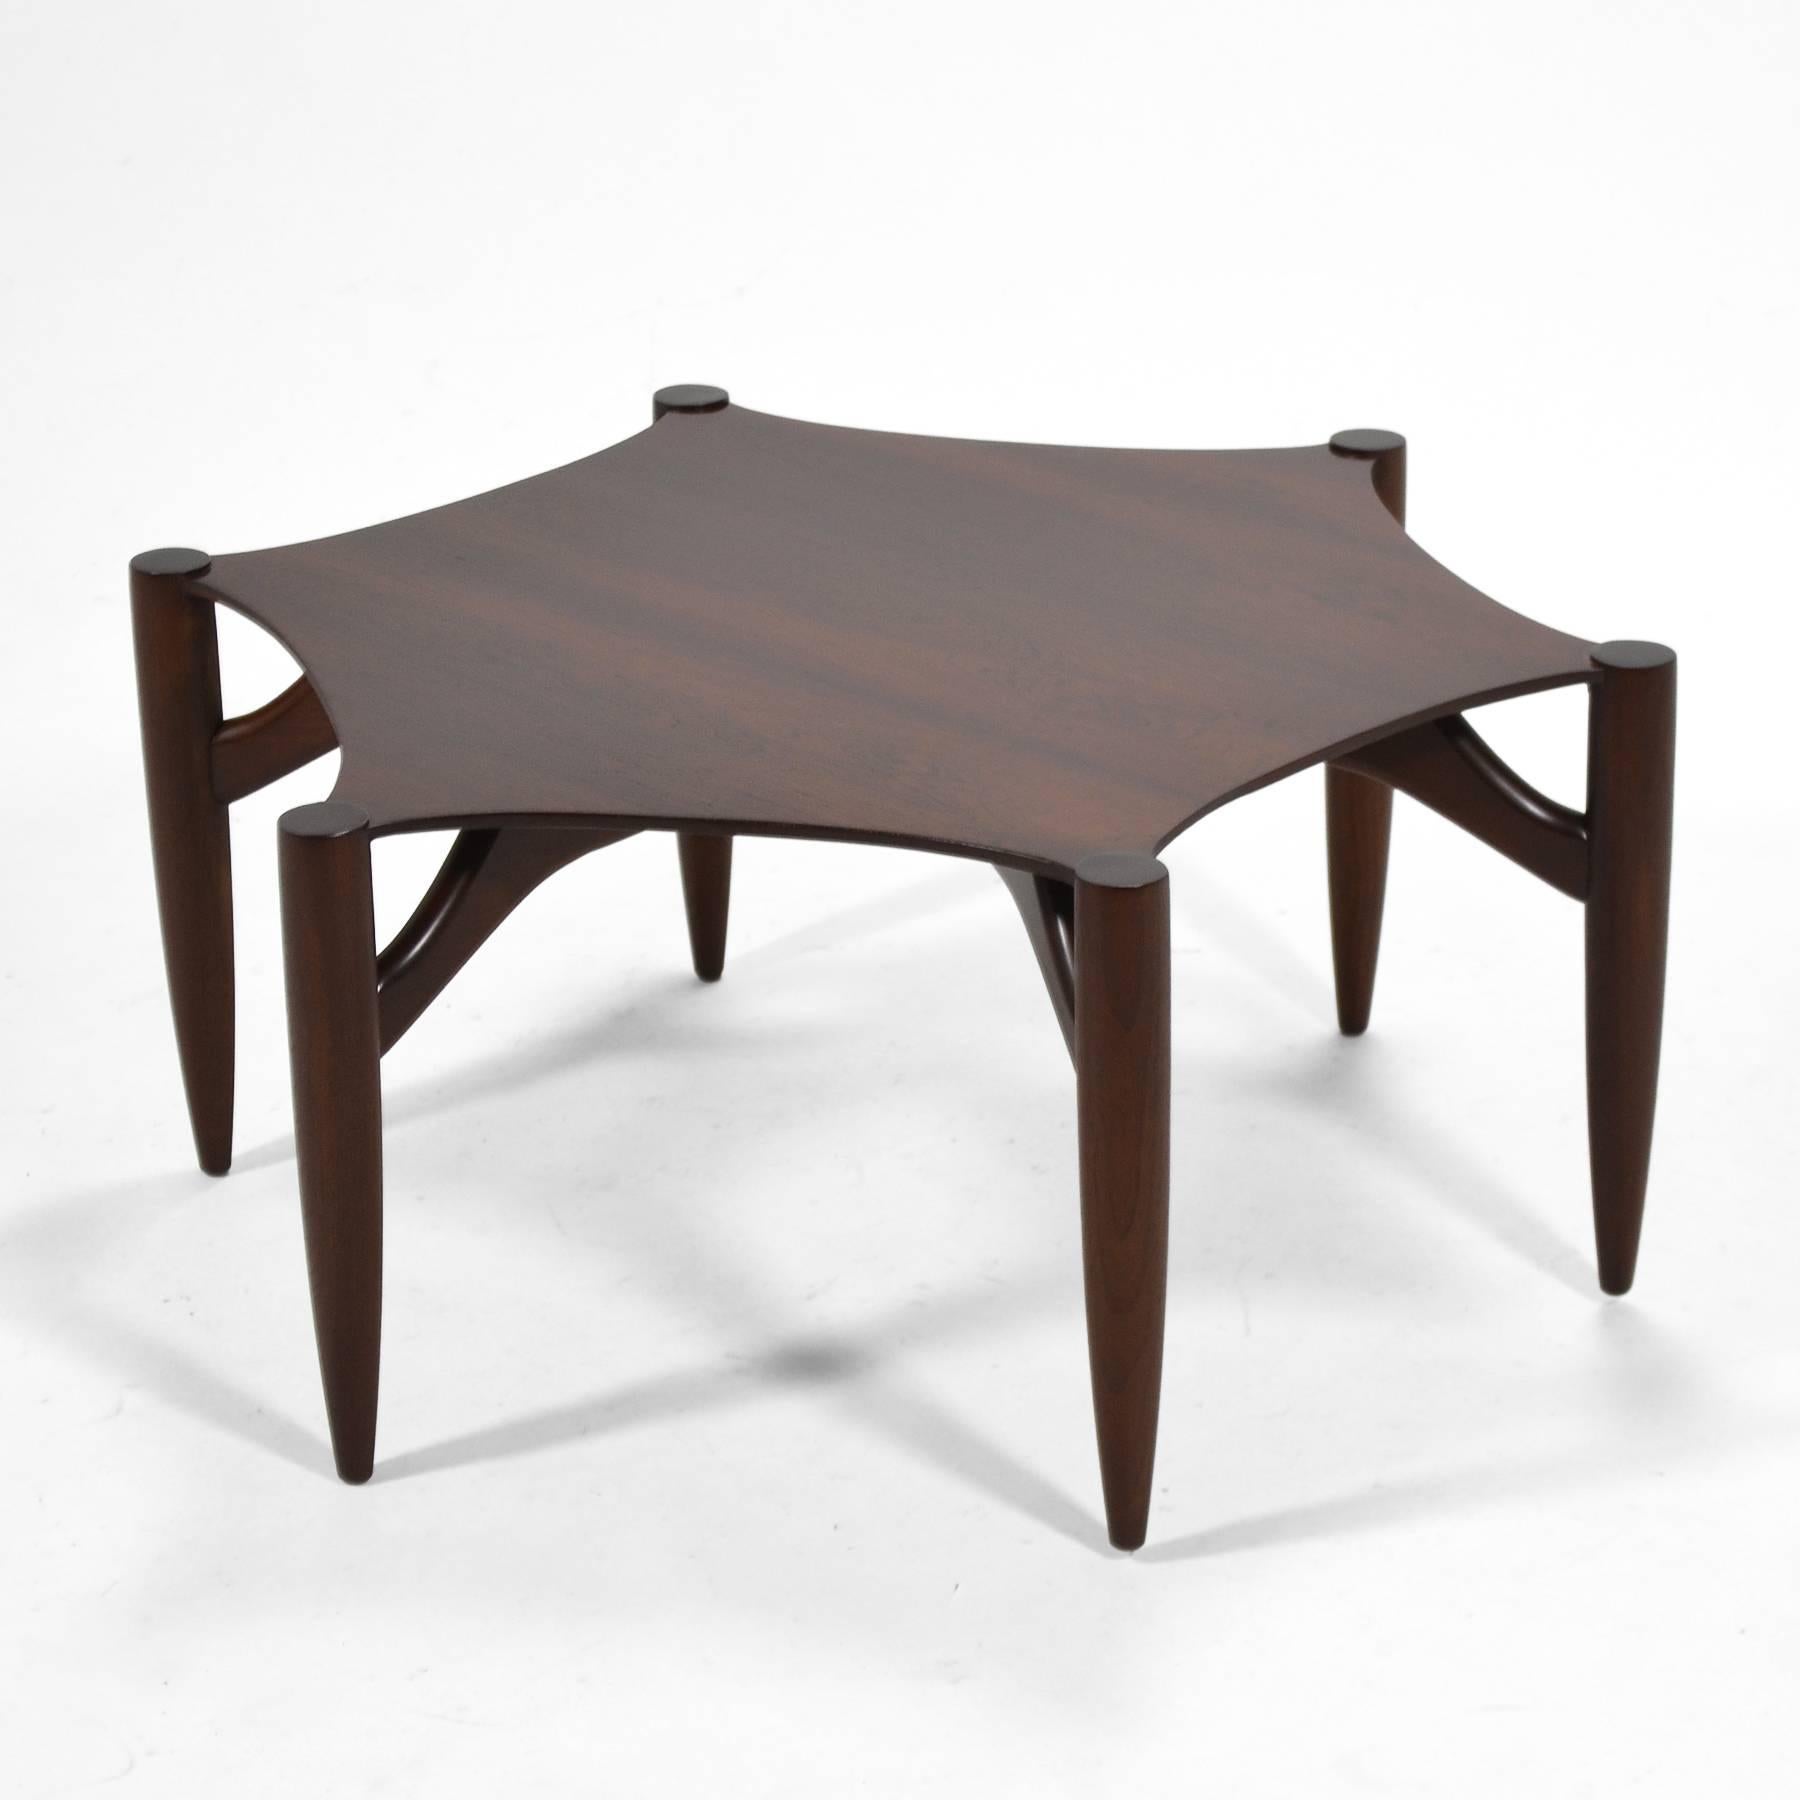 This stunning and rare Greta Grossman coffee table by Glenn of California has a beautiful rosewood top supported by six sculptural legs.